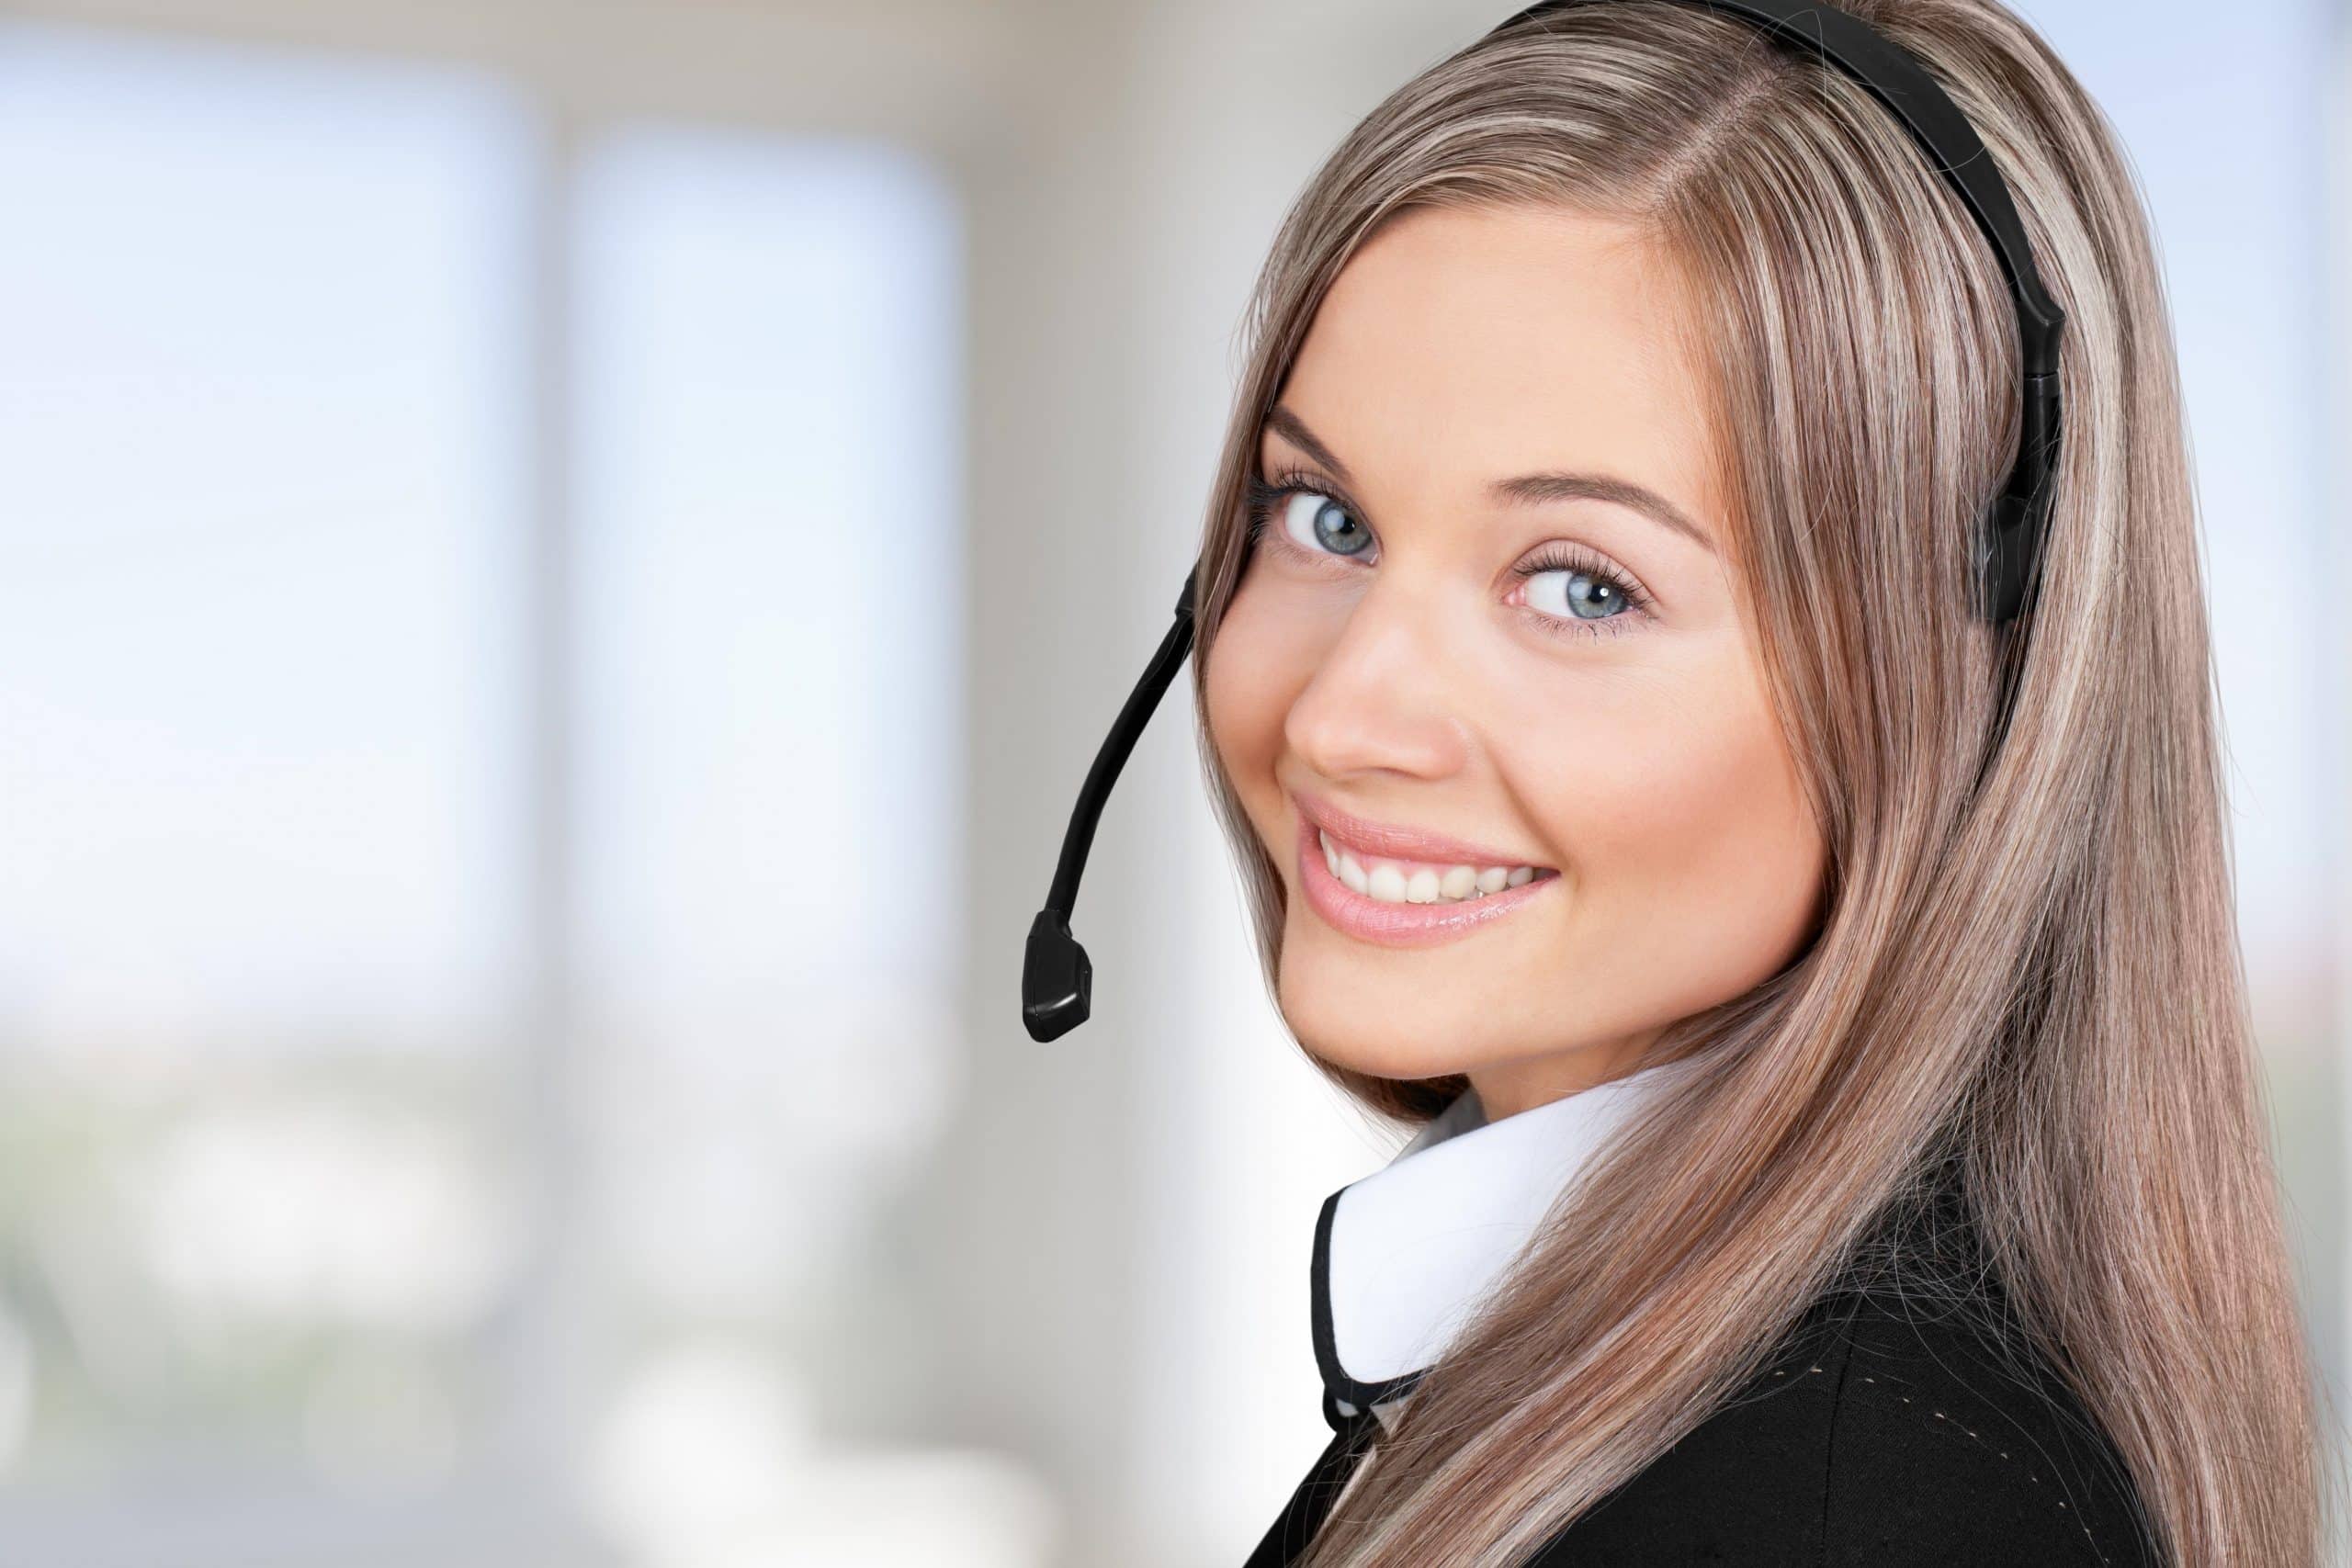 virtual-receptionist-service-vs-live-answering-service-which-is